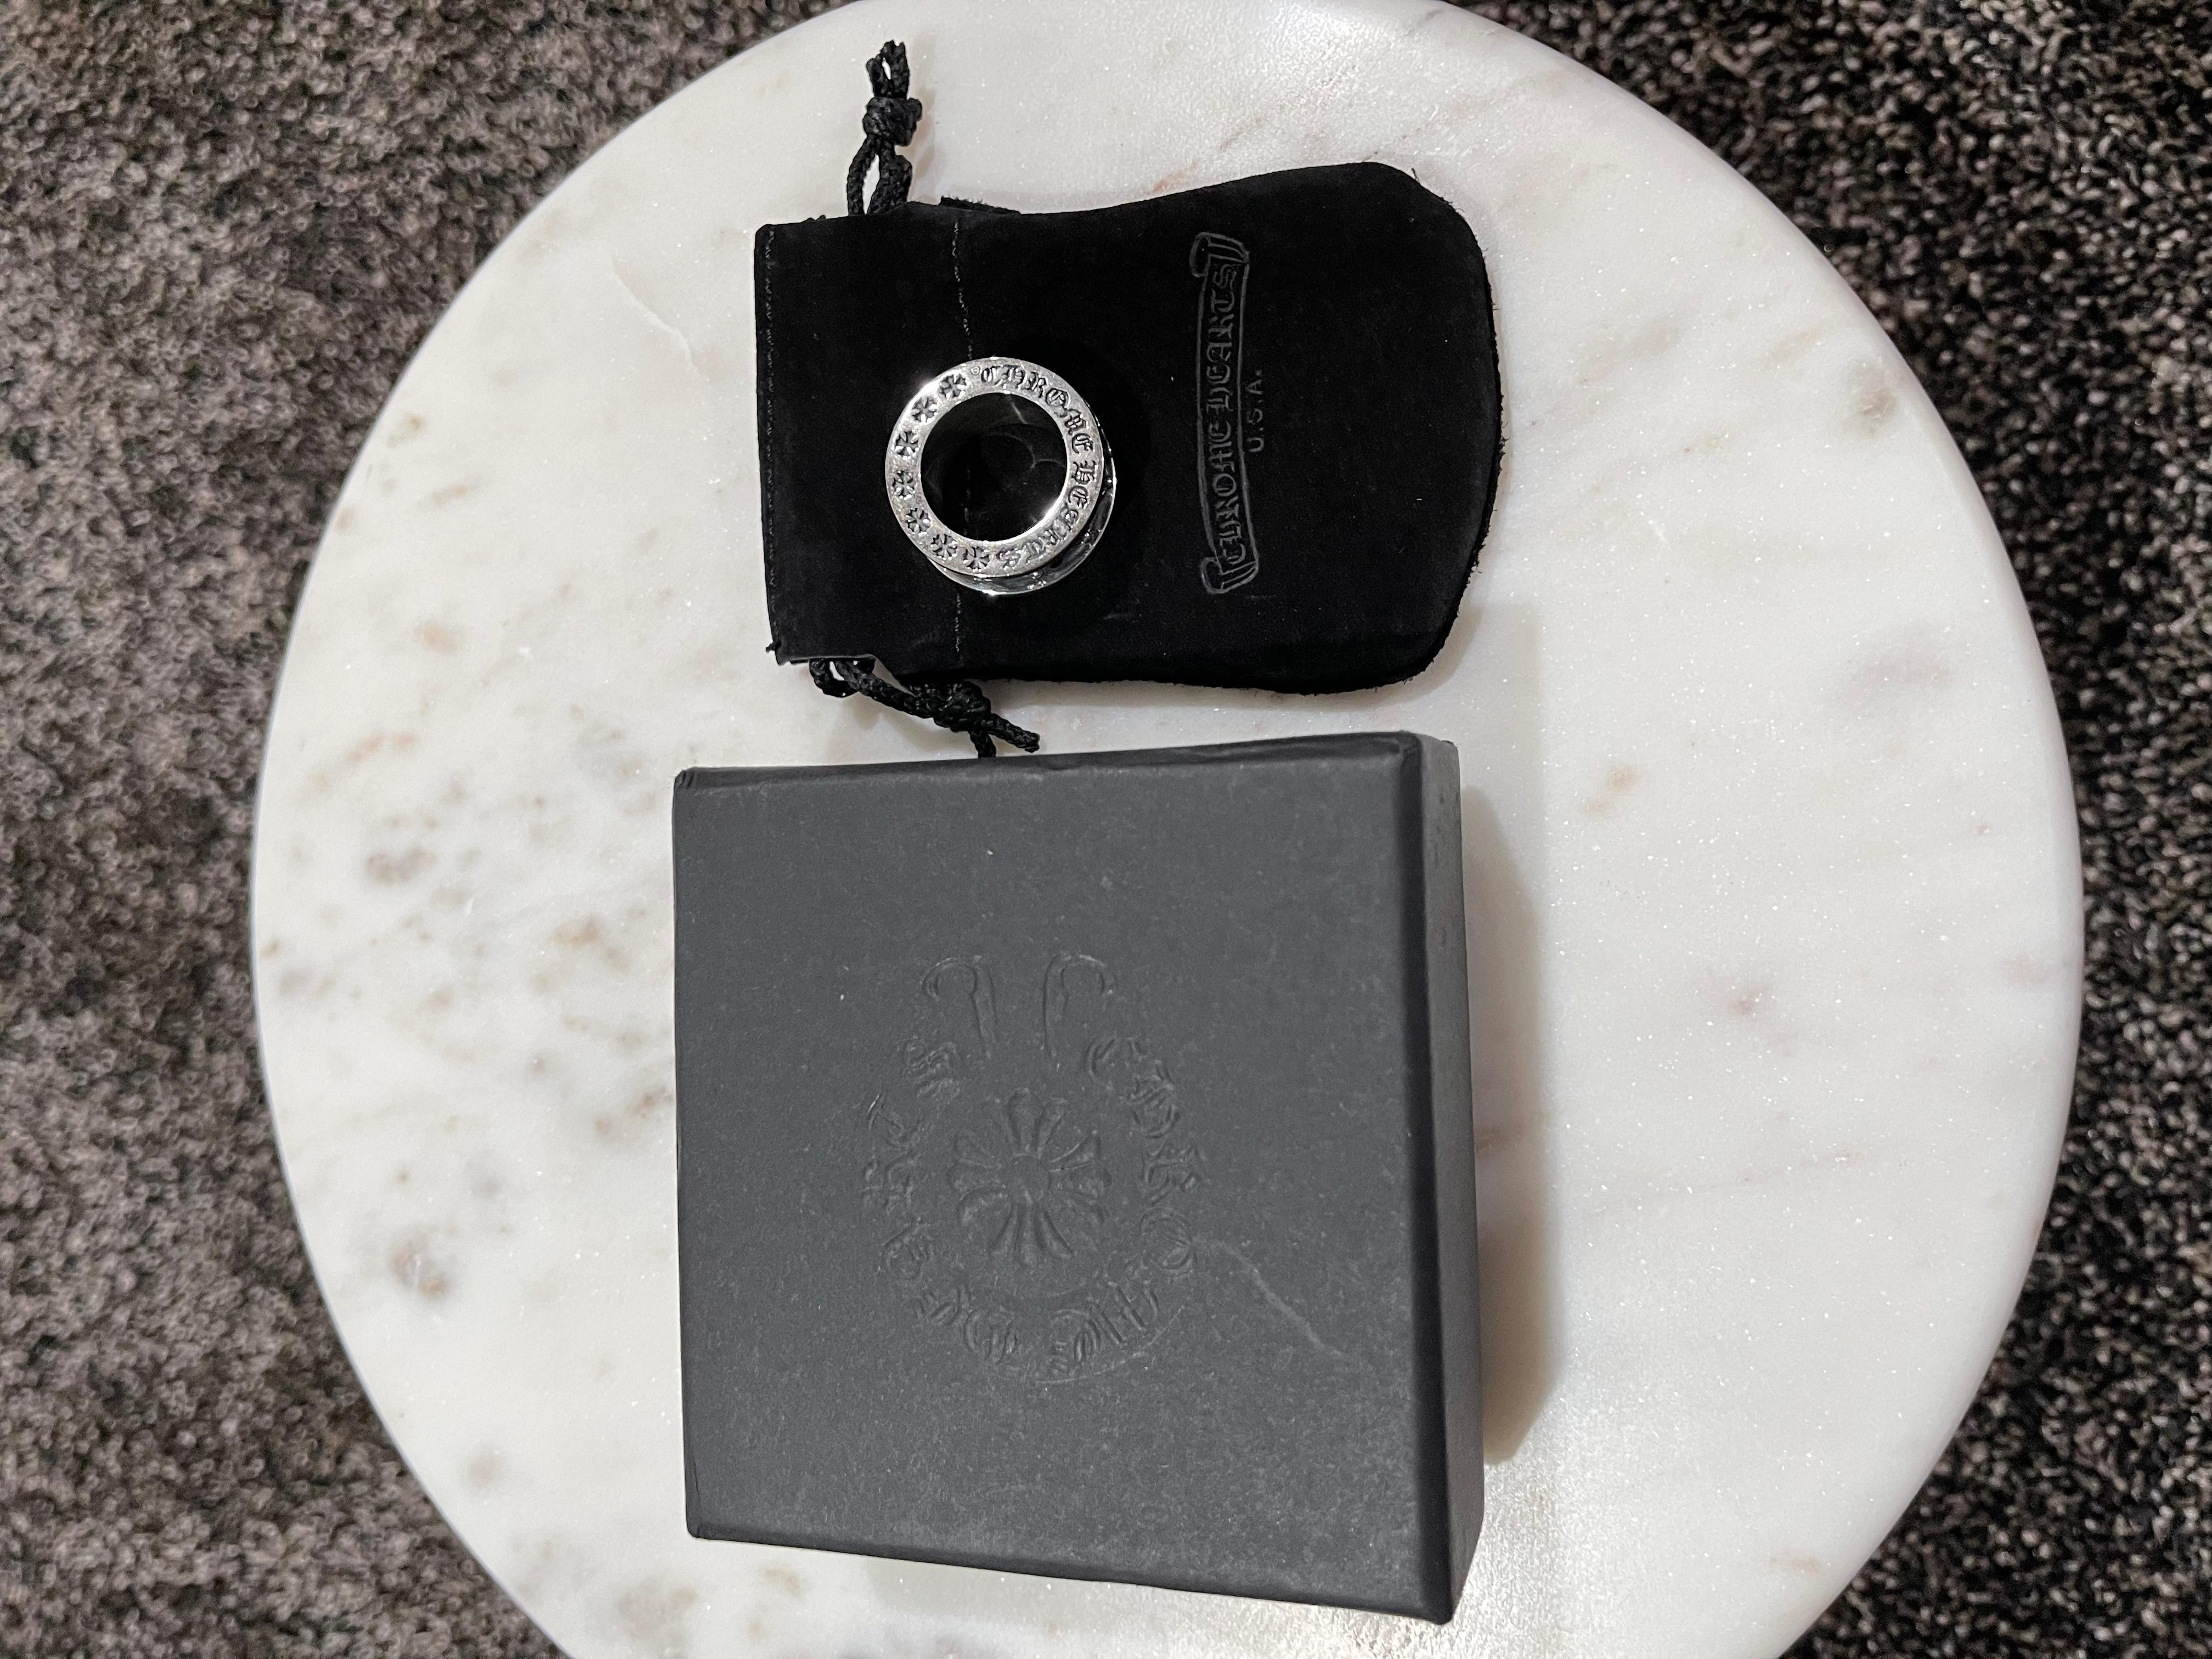 Chrome Hearts “F You” Spinner Silver Ring
Brand new w/ dust bag and box
Size 7 (check picture for exact measurement)

Extremely rare Chrome Hearts ring. The middle of the ring actually spins.
All sales are final.